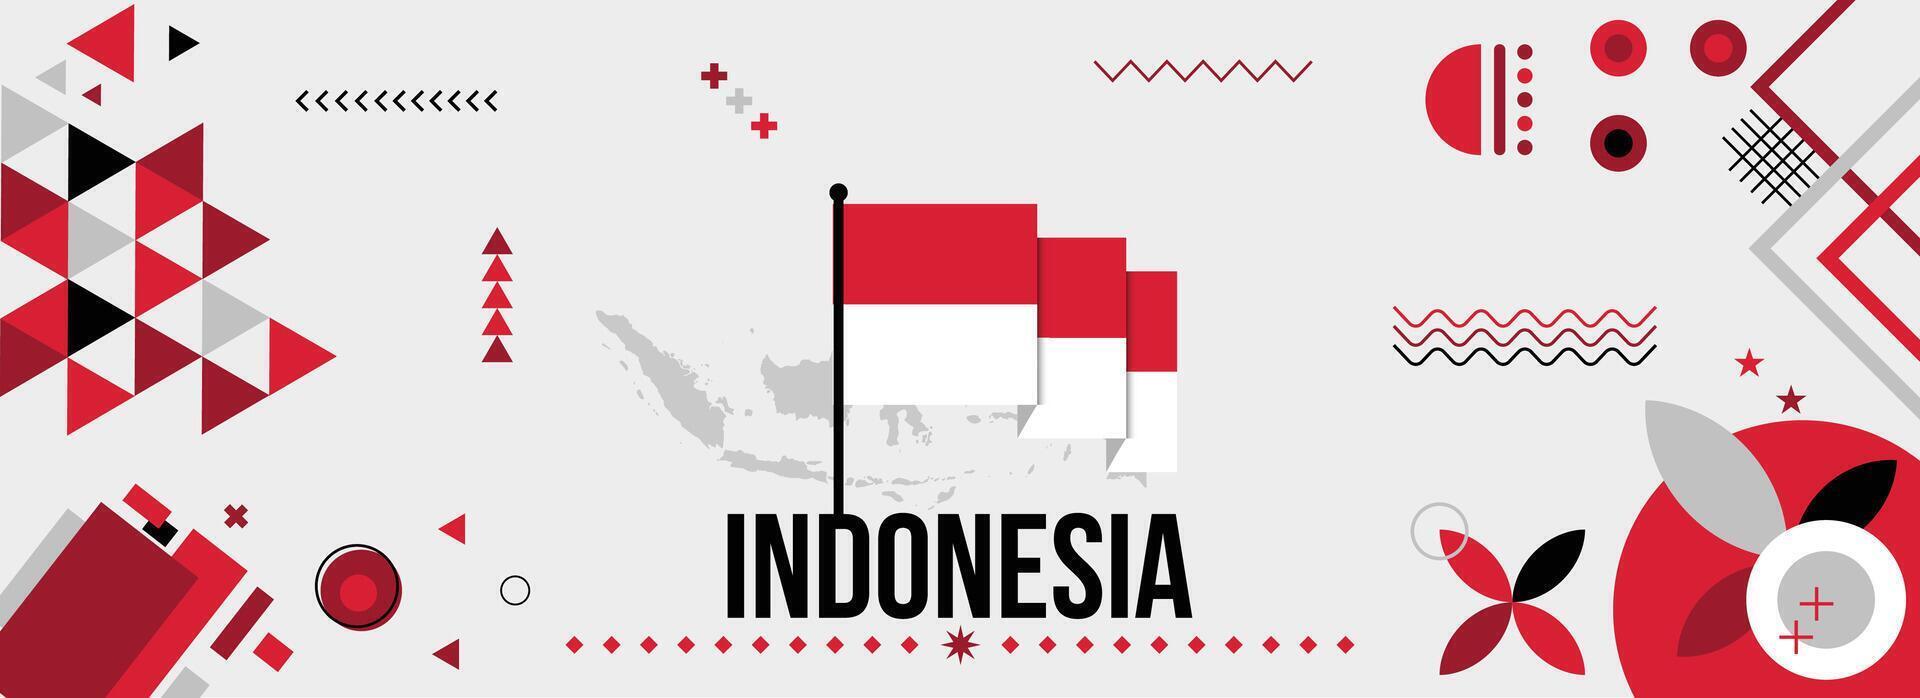 Indonesia national or independence day banner for country celebration. Flag and map of Indonesia with raised fists. Modern retro design with typorgaphy abstract geometric icons. Vector illustration